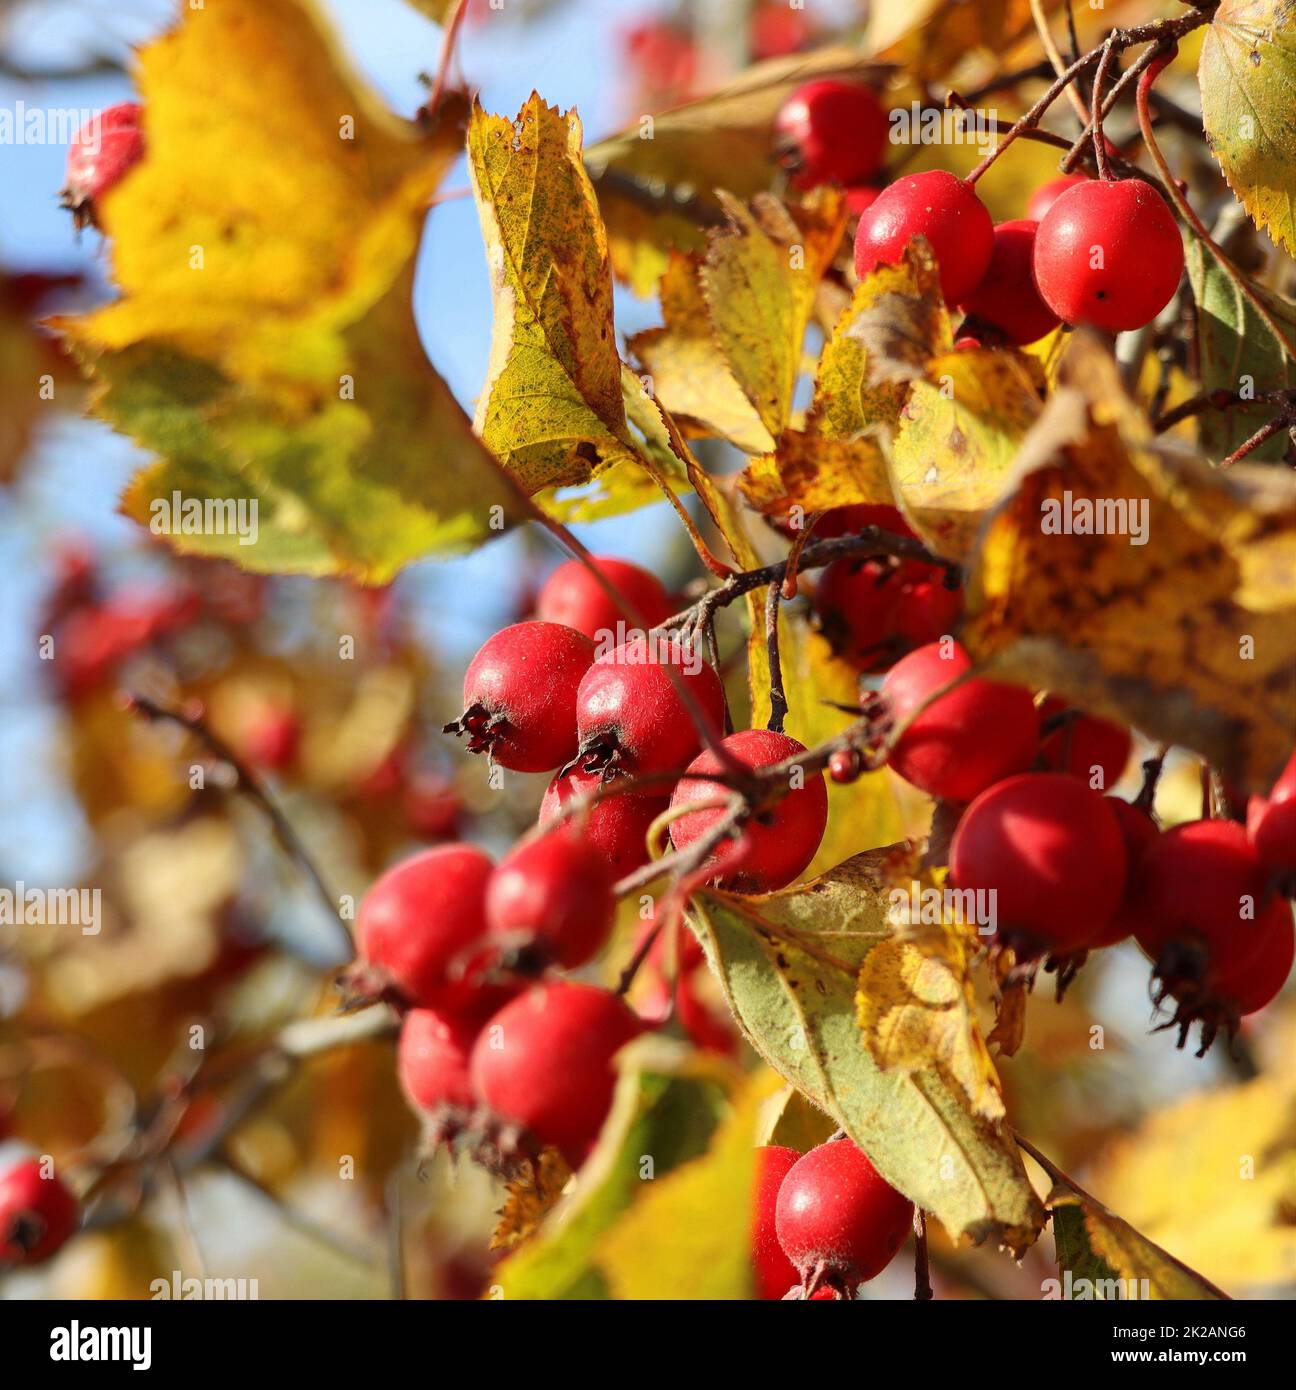 Ripe berries, haws, on Hawthorn also called called thornapple, May-tree, whitethorn, or hawberry, Crataegus monogyna berries in Autumn Stock Photo